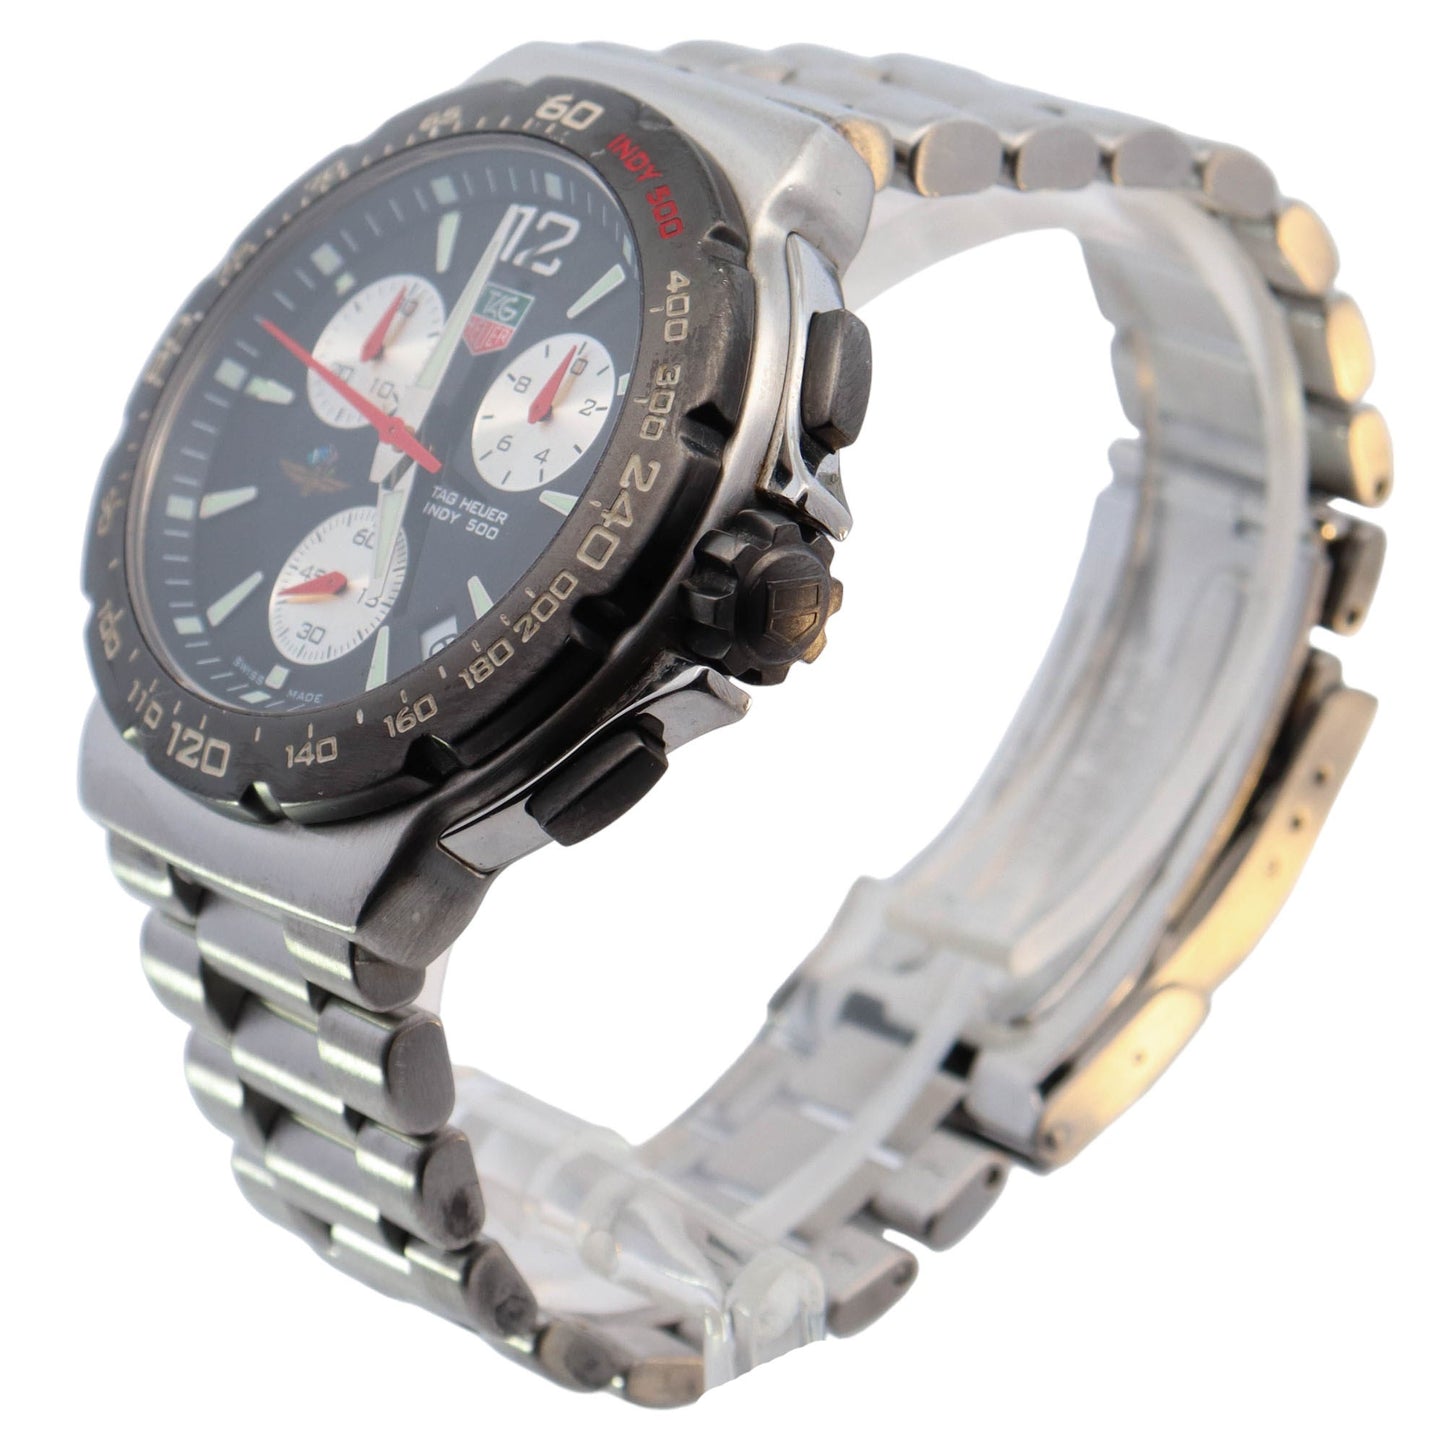 Tag Heuer Formula 1 Quartz Indy 500 Stainless Steel 41mm Black Chronograph Dial Watch Reference# CAC111A.BA0850